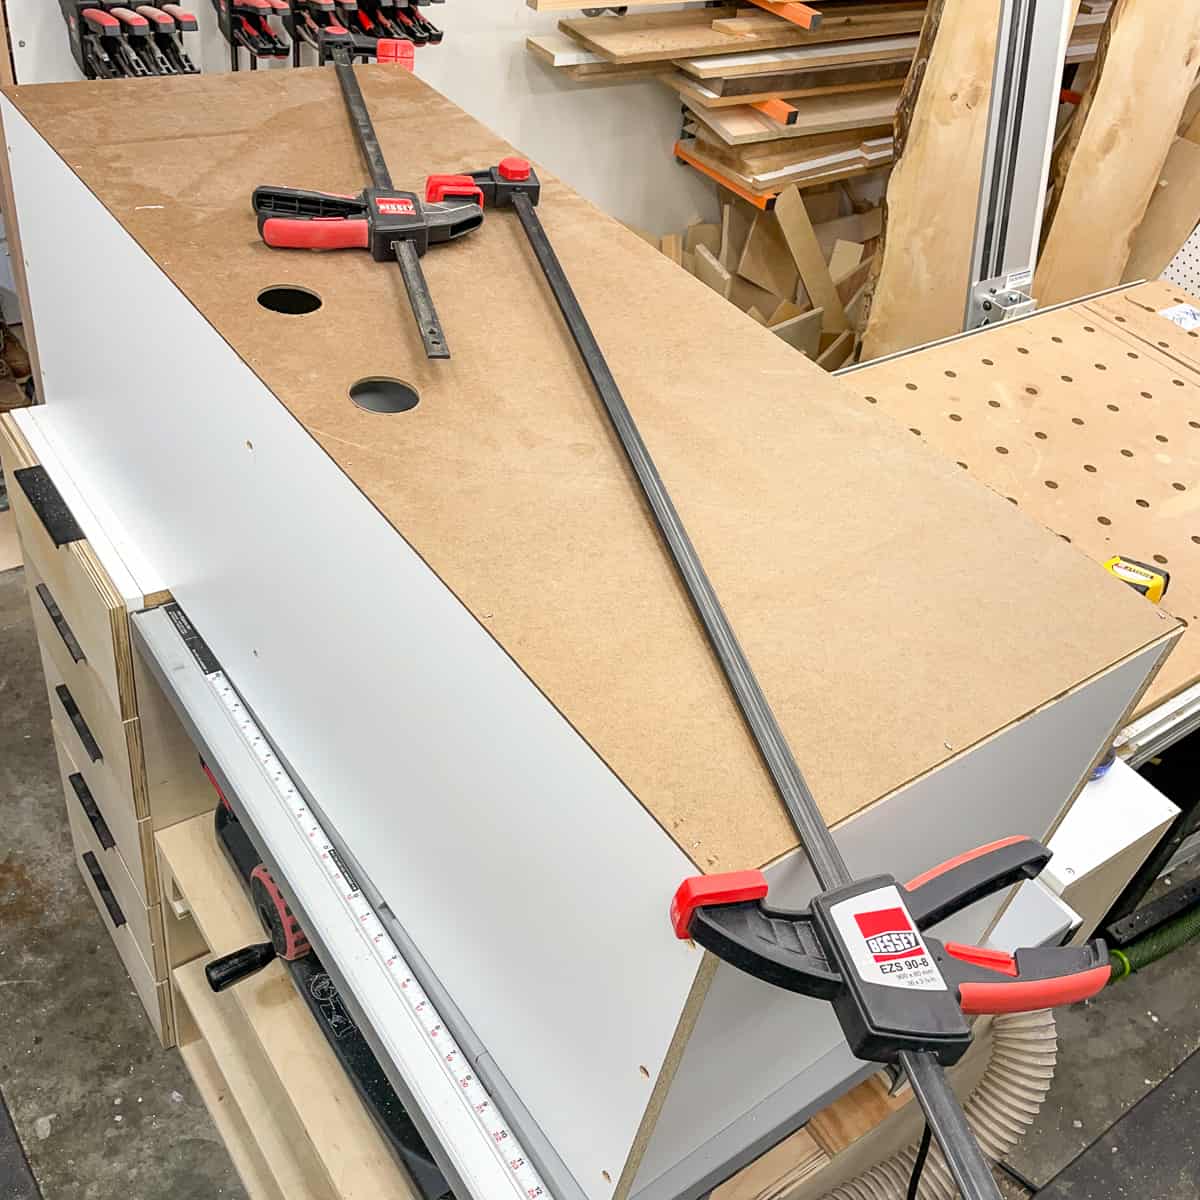 two clamps across the diagonal of the shelf box to force it square while attaching the back panel